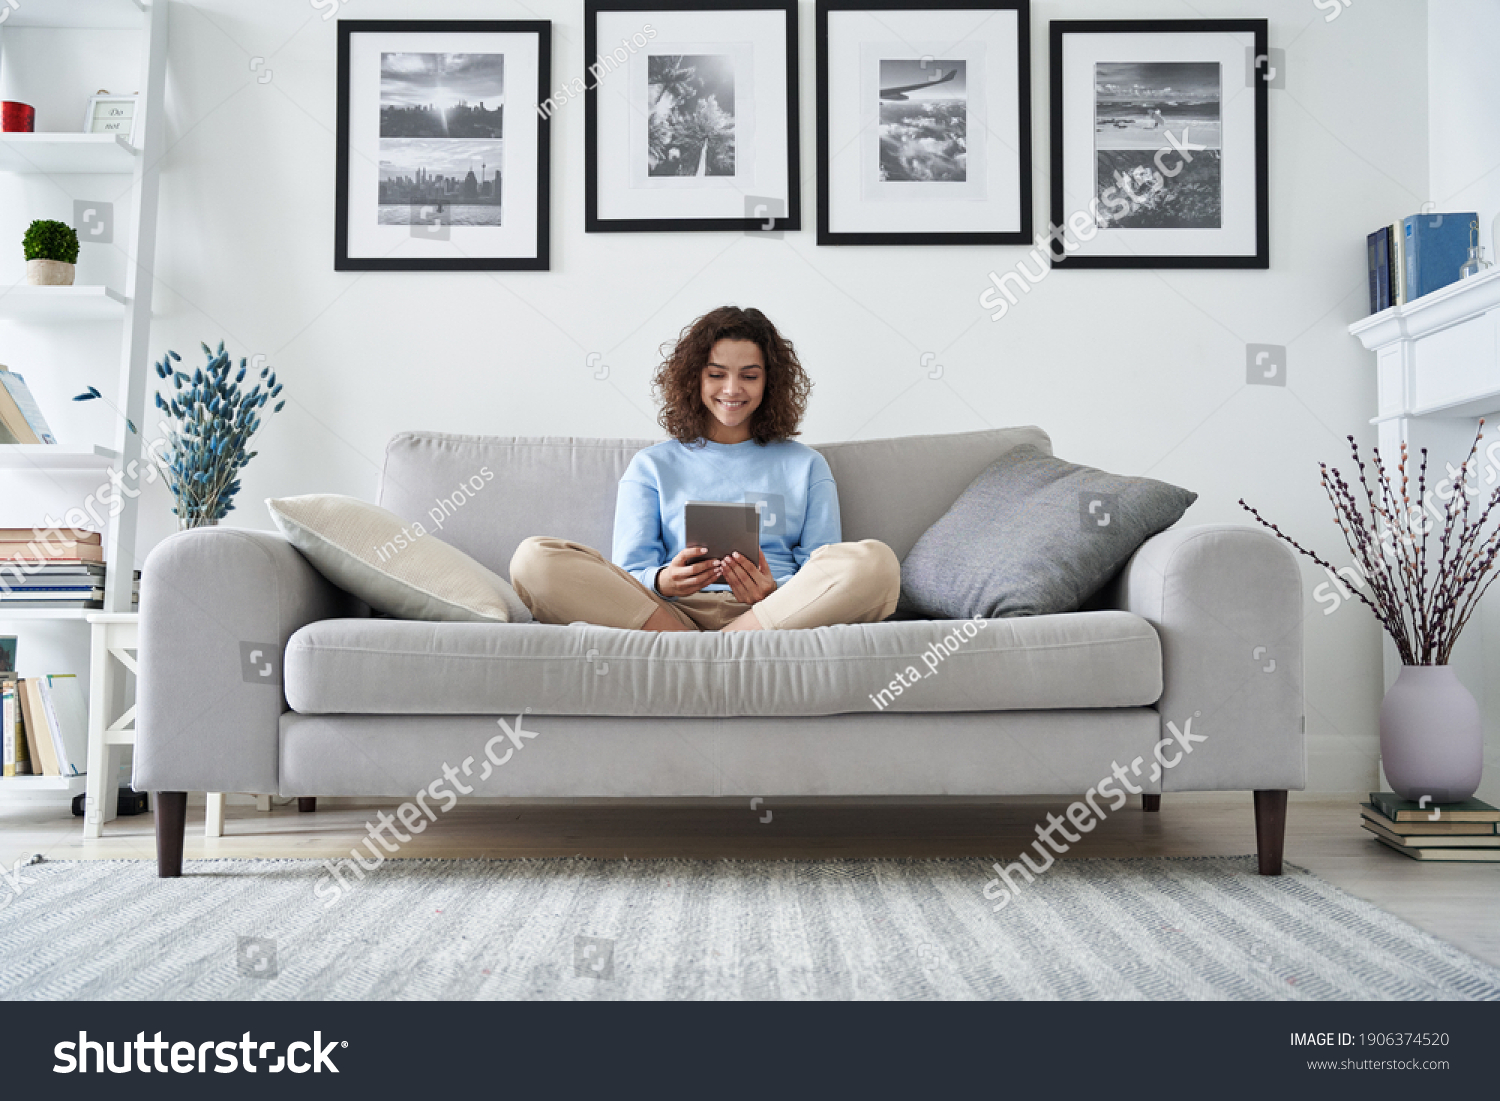 Happy hispanic teen girl holding pad computer gadget using digital tablet technology sitting on couch at home. Smiling young woman using apps, shopping online, reading news, browsing internet on sofa. #1906374520